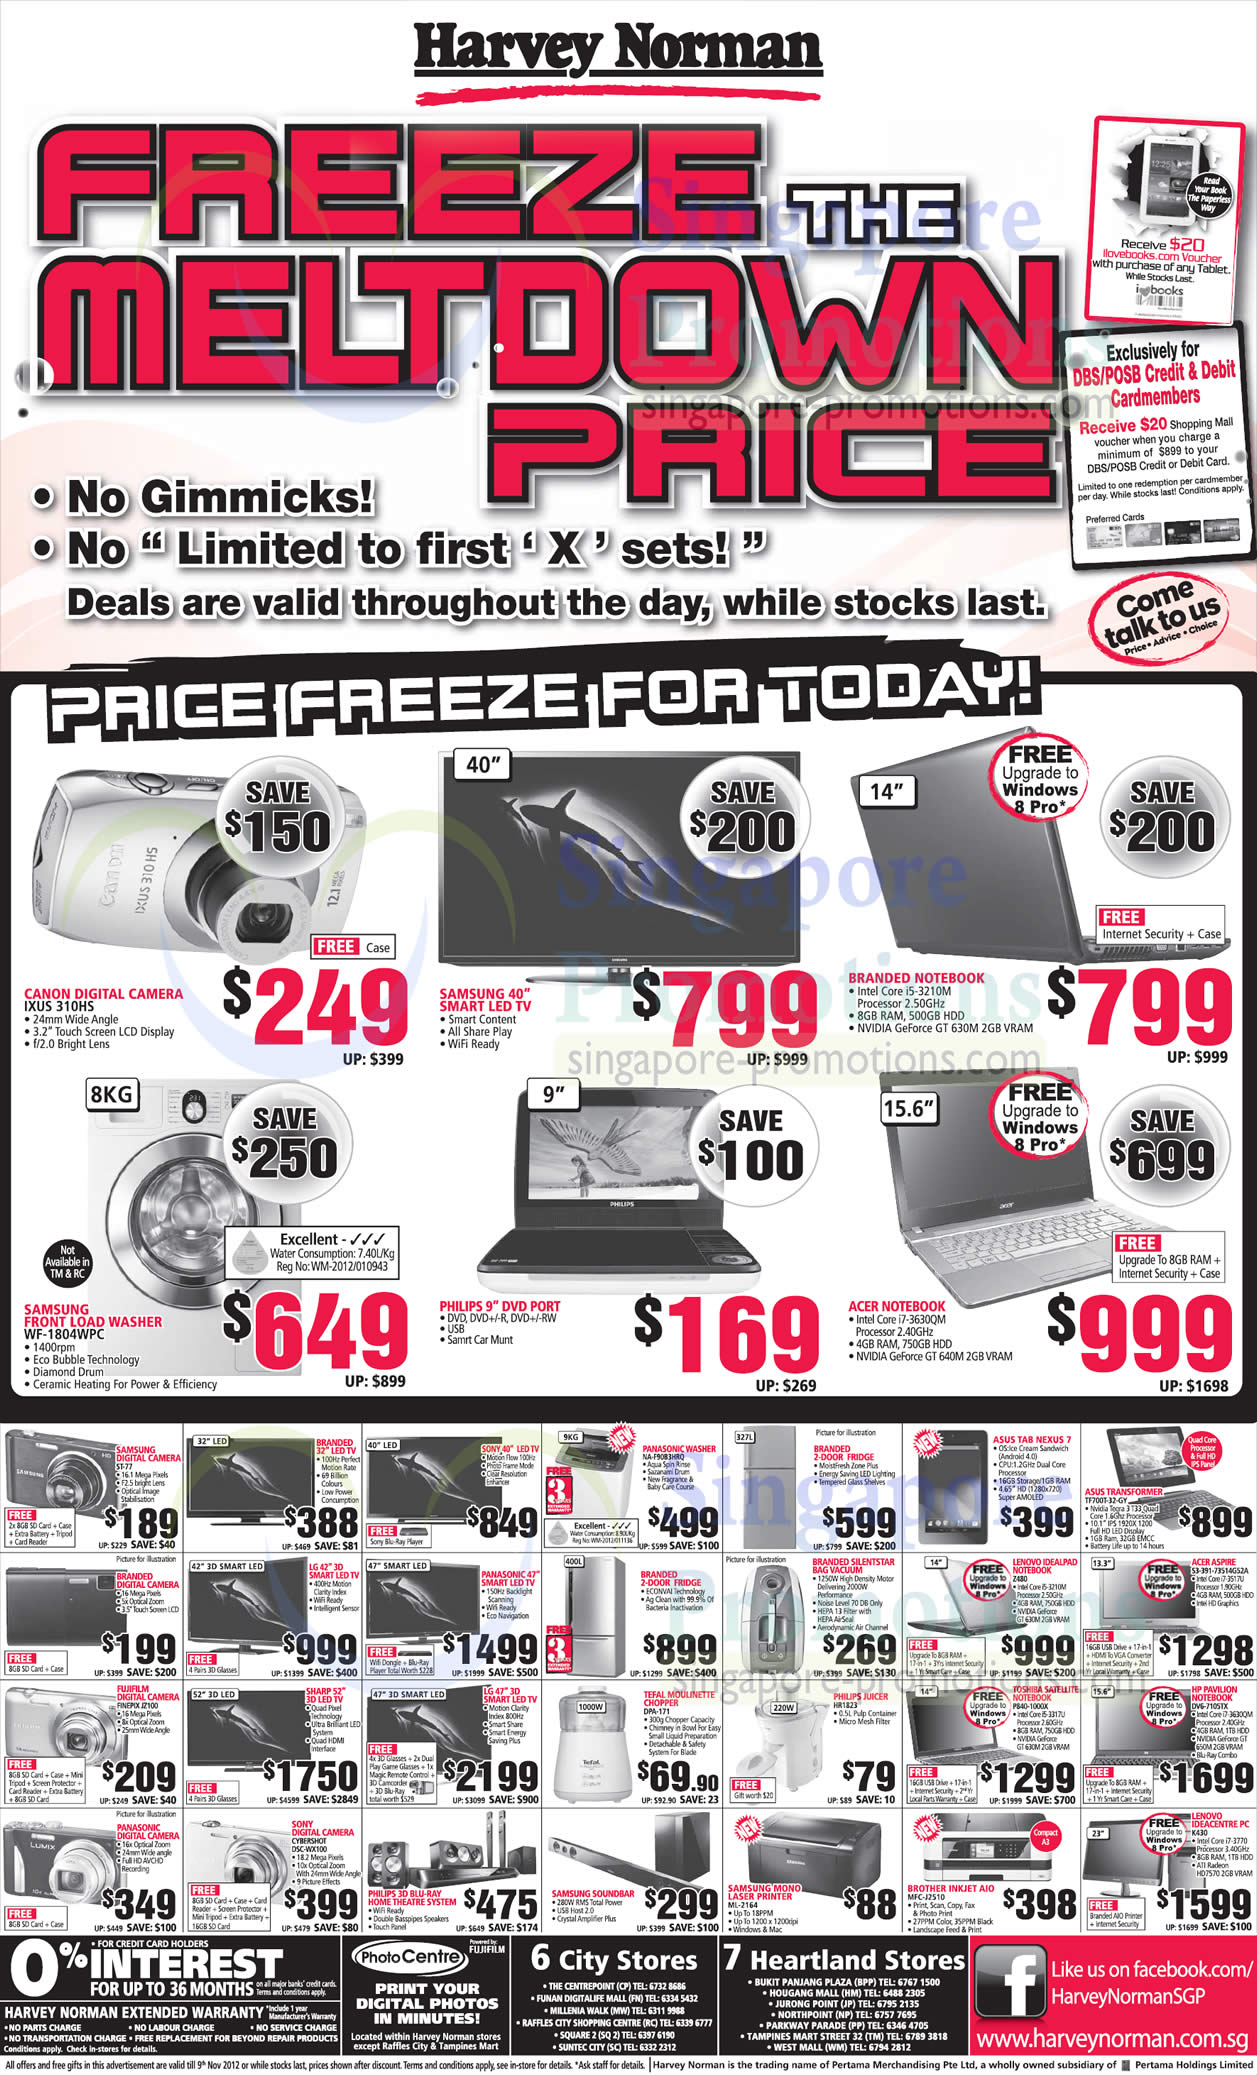 Featured image for Harvey Norman Digital Cameras, Furniture, Notebooks & Appliances Offers 3 - 9 Nov 2012